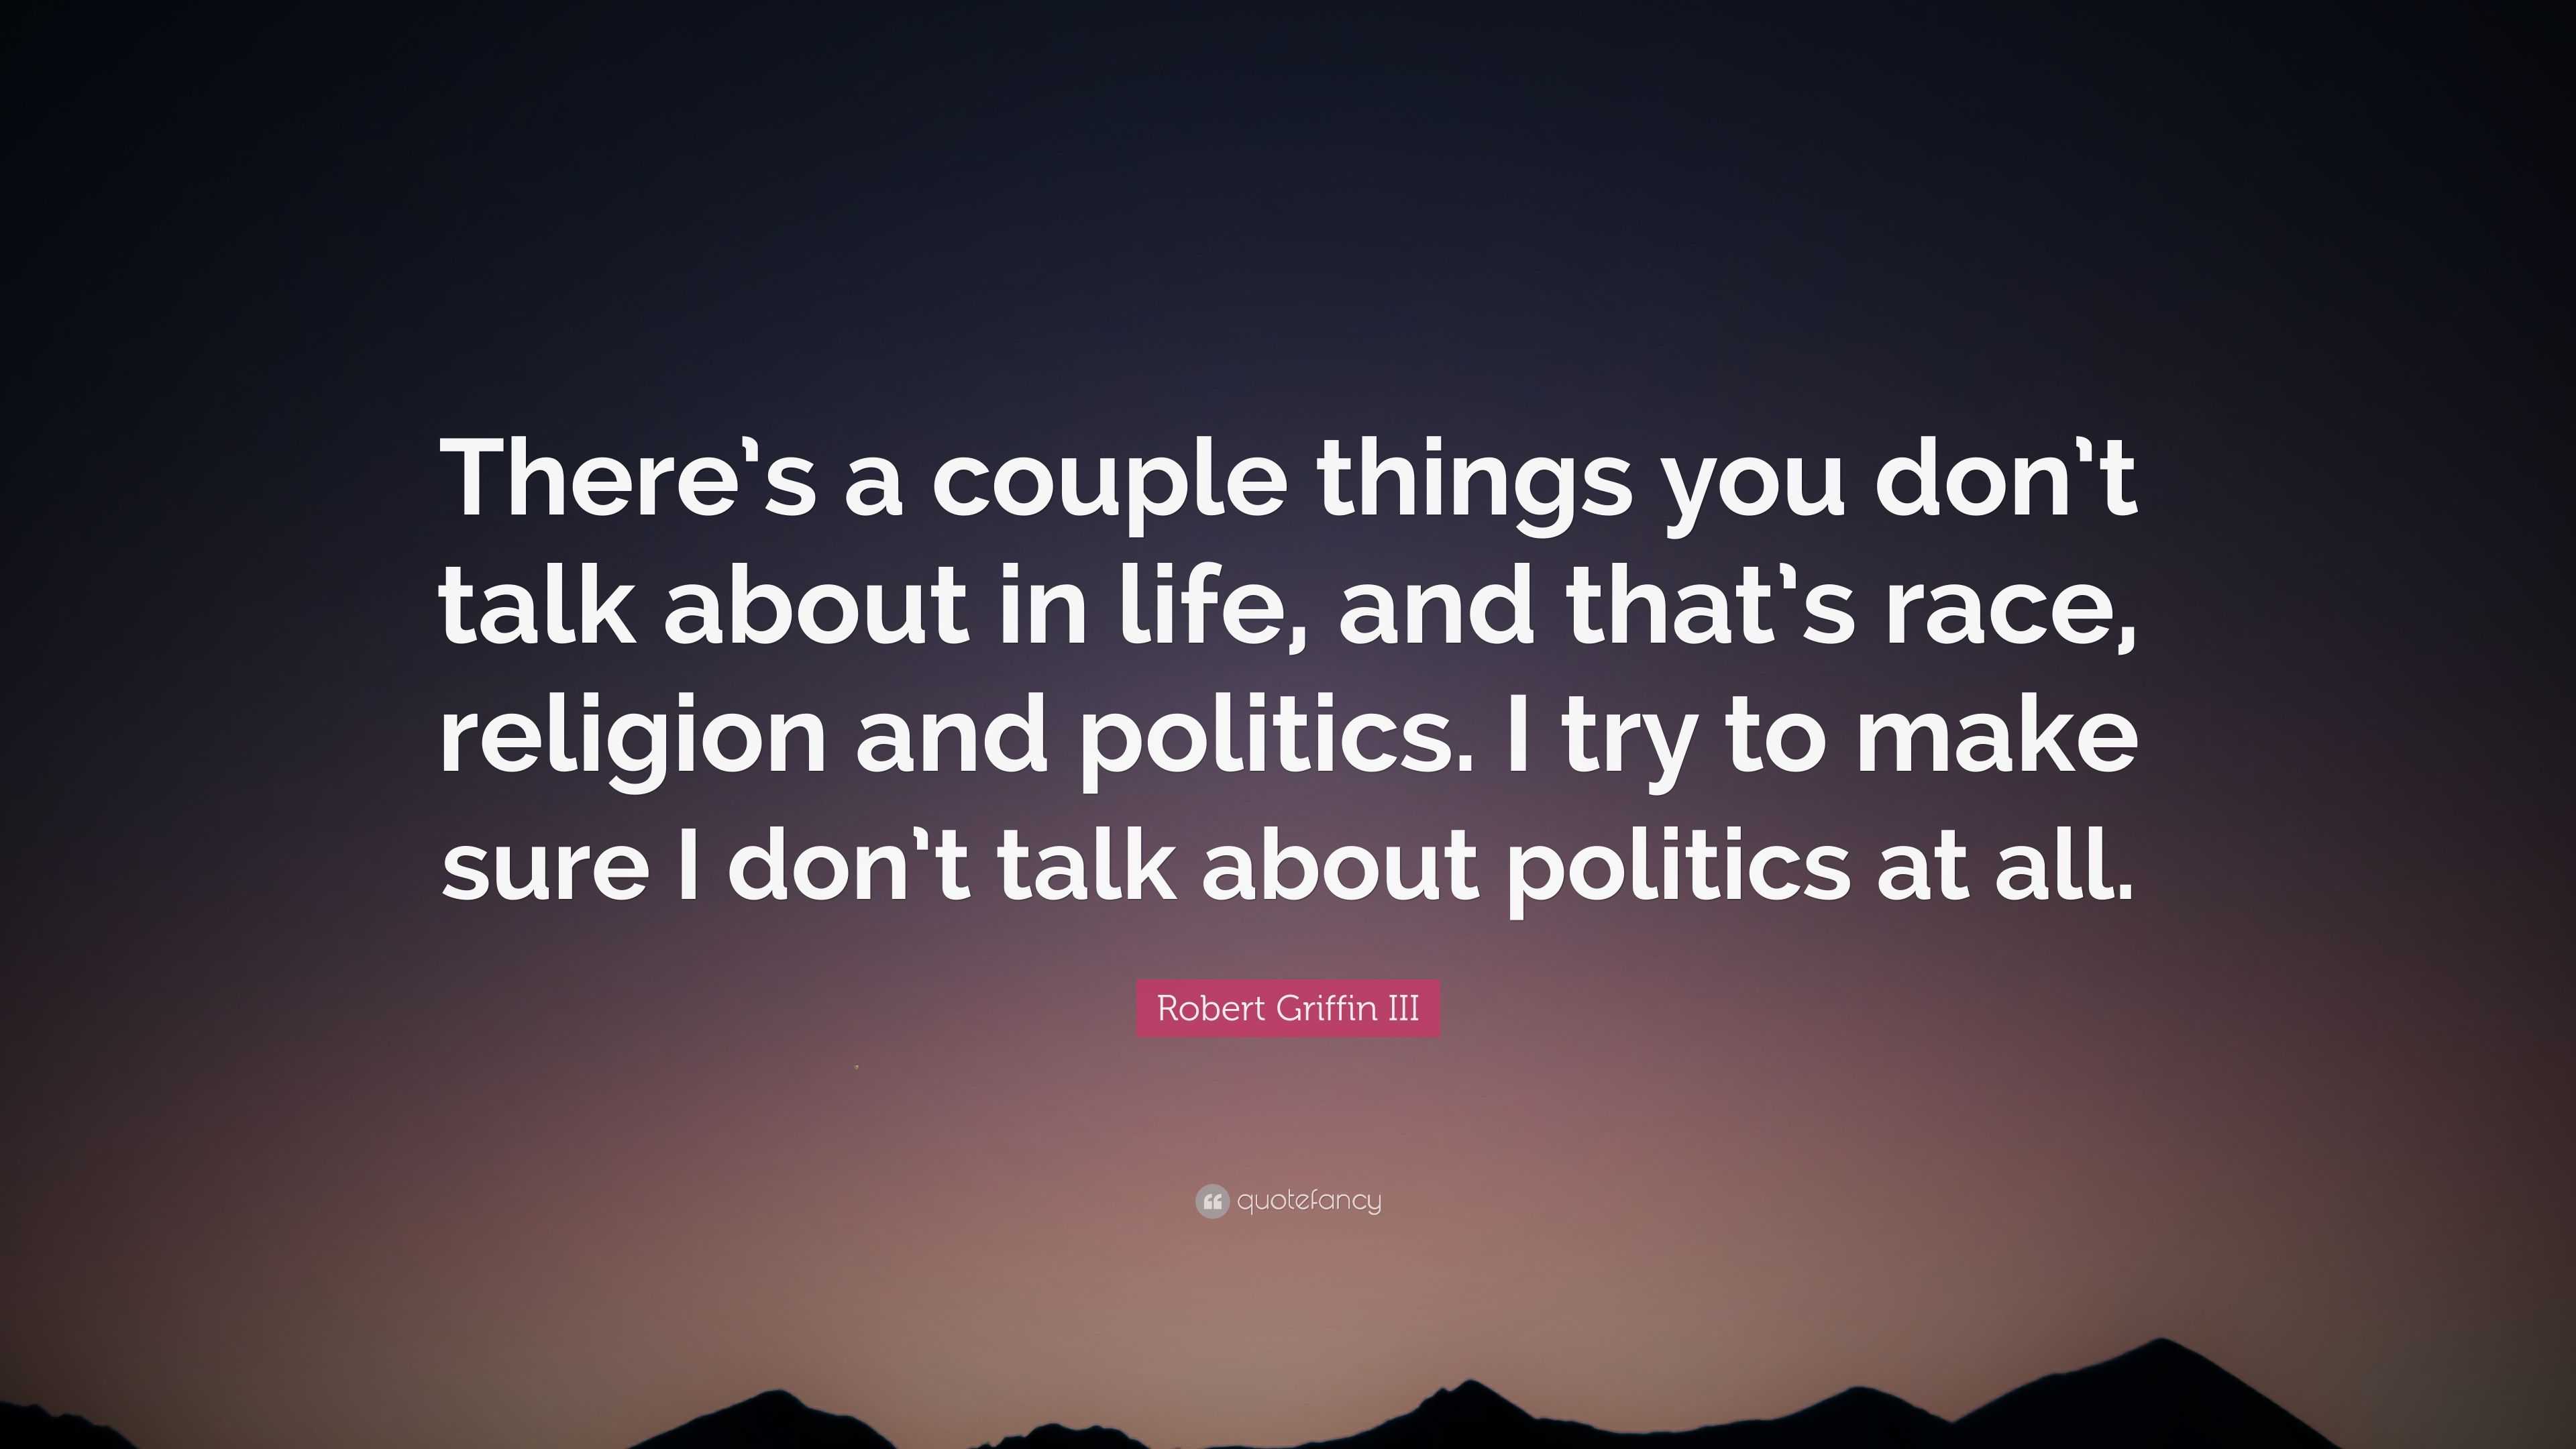 Robert Griffin Iii Quote There S A Couple Things You Don T Talk About In Life And That S Race Religion And Politics I Try To Make Sure I Don T